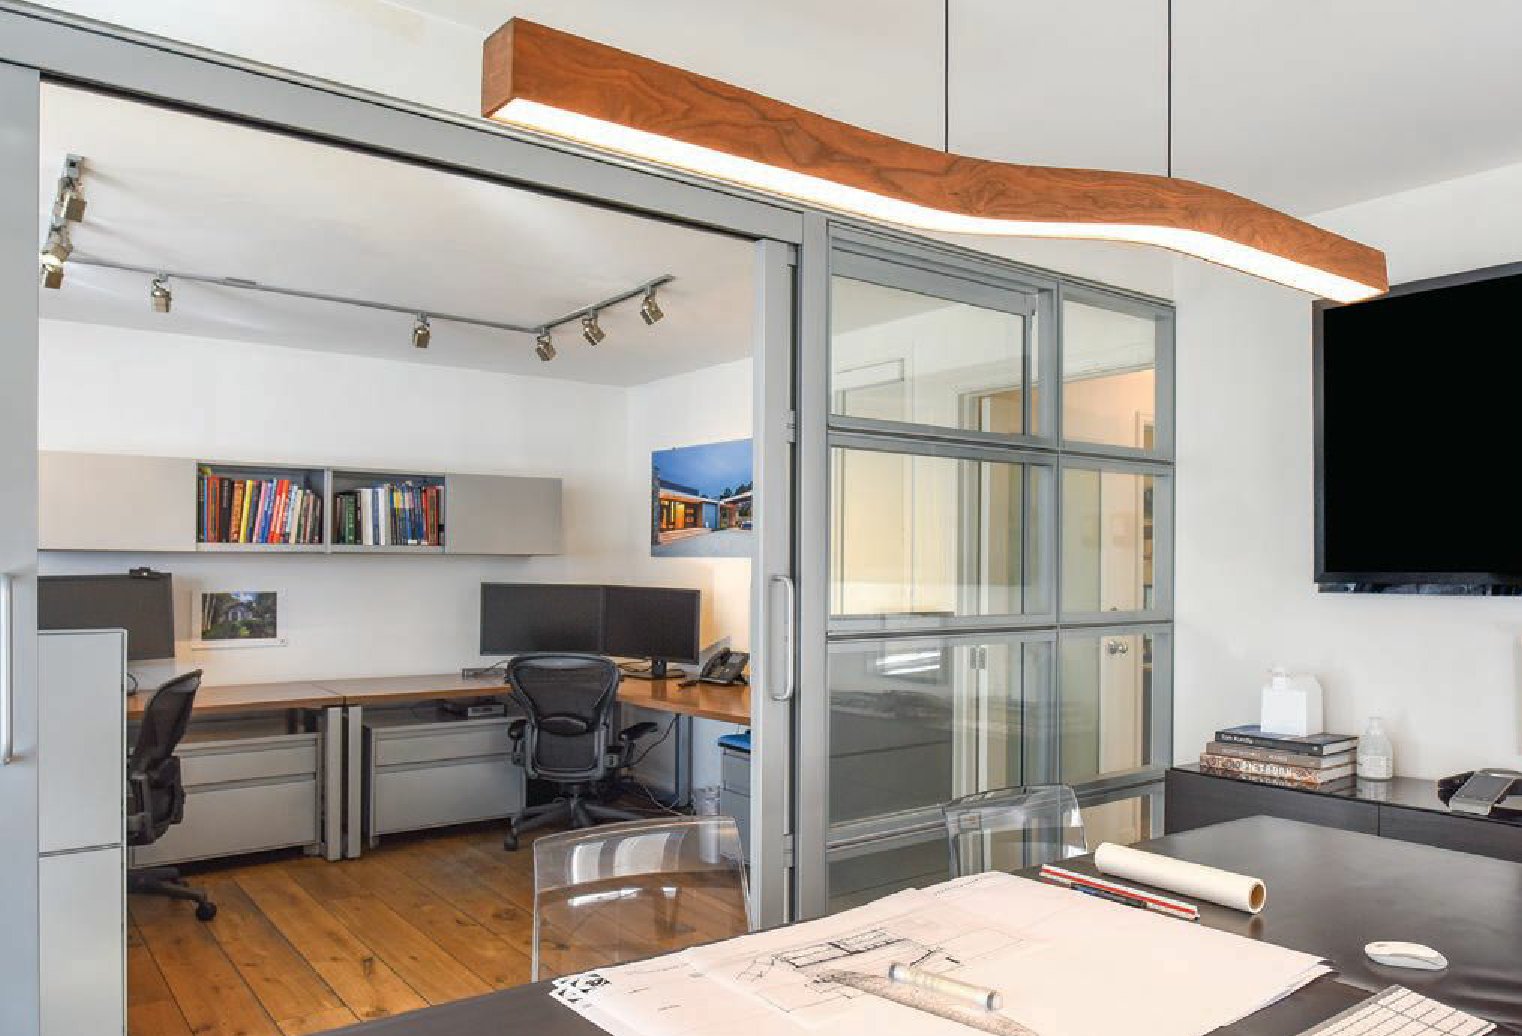 Double-pane glass doors slide closed for privacy. PHOTO COURTESY OF ZONE 4 ARCHITECTS